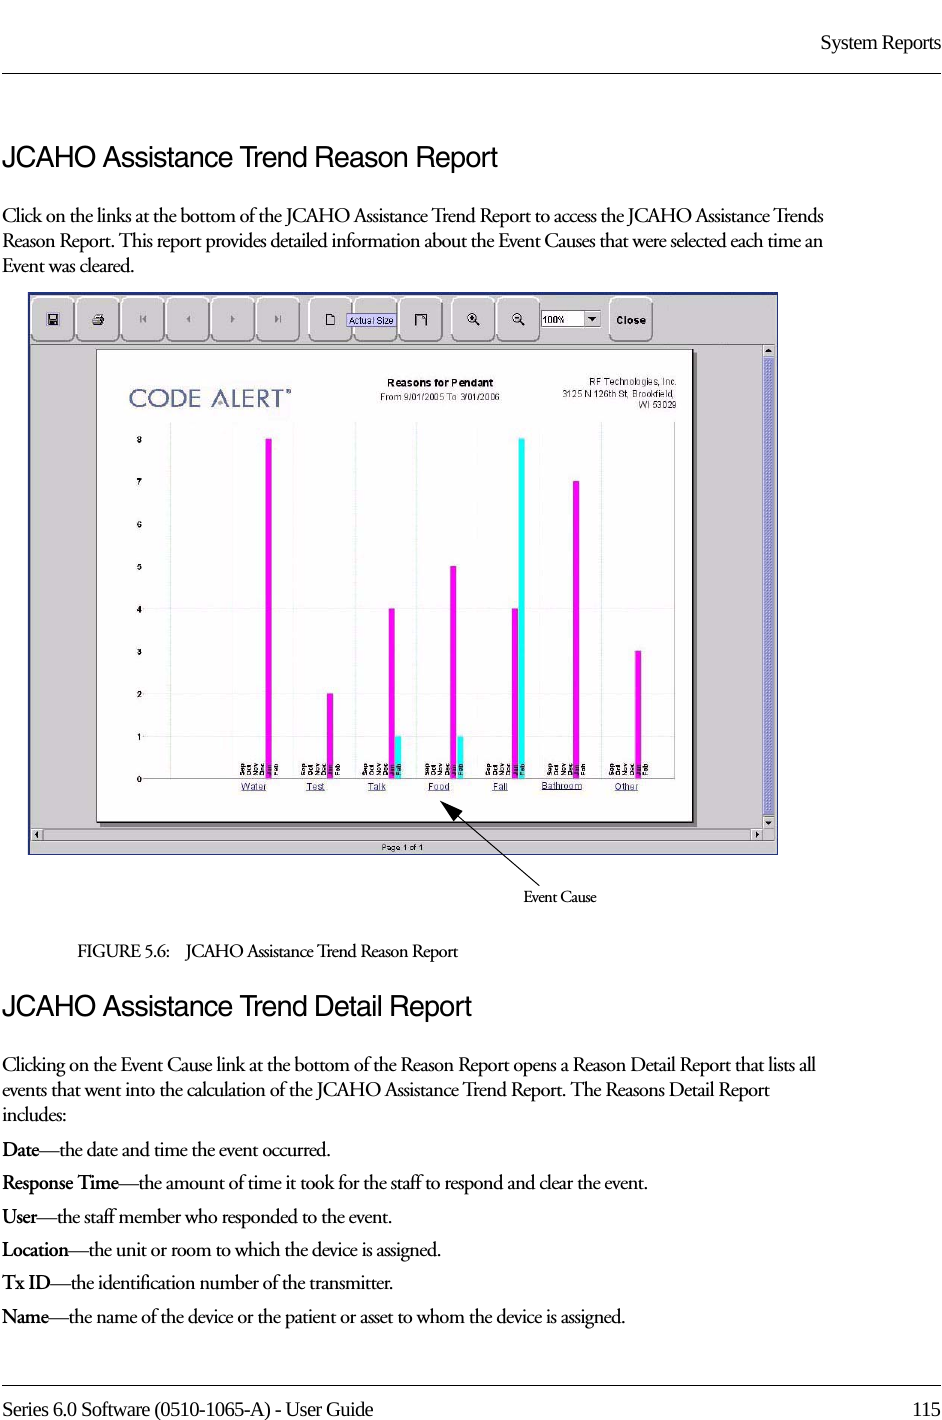 Series 6.0 Software (0510-1065-A) - User Guide  115System ReportsJCAHO Assistance Trend Reason ReportClick on the links at the bottom of the JCAHO Assistance Trend Report to access the JCAHO Assistance Trends Reason Report. This report provides detailed information about the Event Causes that were selected each time an Event was cleared.FIGURE 5.6:    JCAHO Assistance Trend Reason Report JCAHO Assistance Trend Detail ReportClicking on the Event Cause link at the bottom of the Reason Report opens a Reason Detail Report that lists all events that went into the calculation of the JCAHO Assistance Trend Report. The Reasons Detail Report includes:Date—the date and time the event occurred.Response Time—the amount of time it took for the staff to respond and clear the event.User—the staff member who responded to the event. Location—the unit or room to which the device is assigned.Tx ID—the identification number of the transmitter.Name—the name of the device or the patient or asset to whom the device is assigned.Event Cause